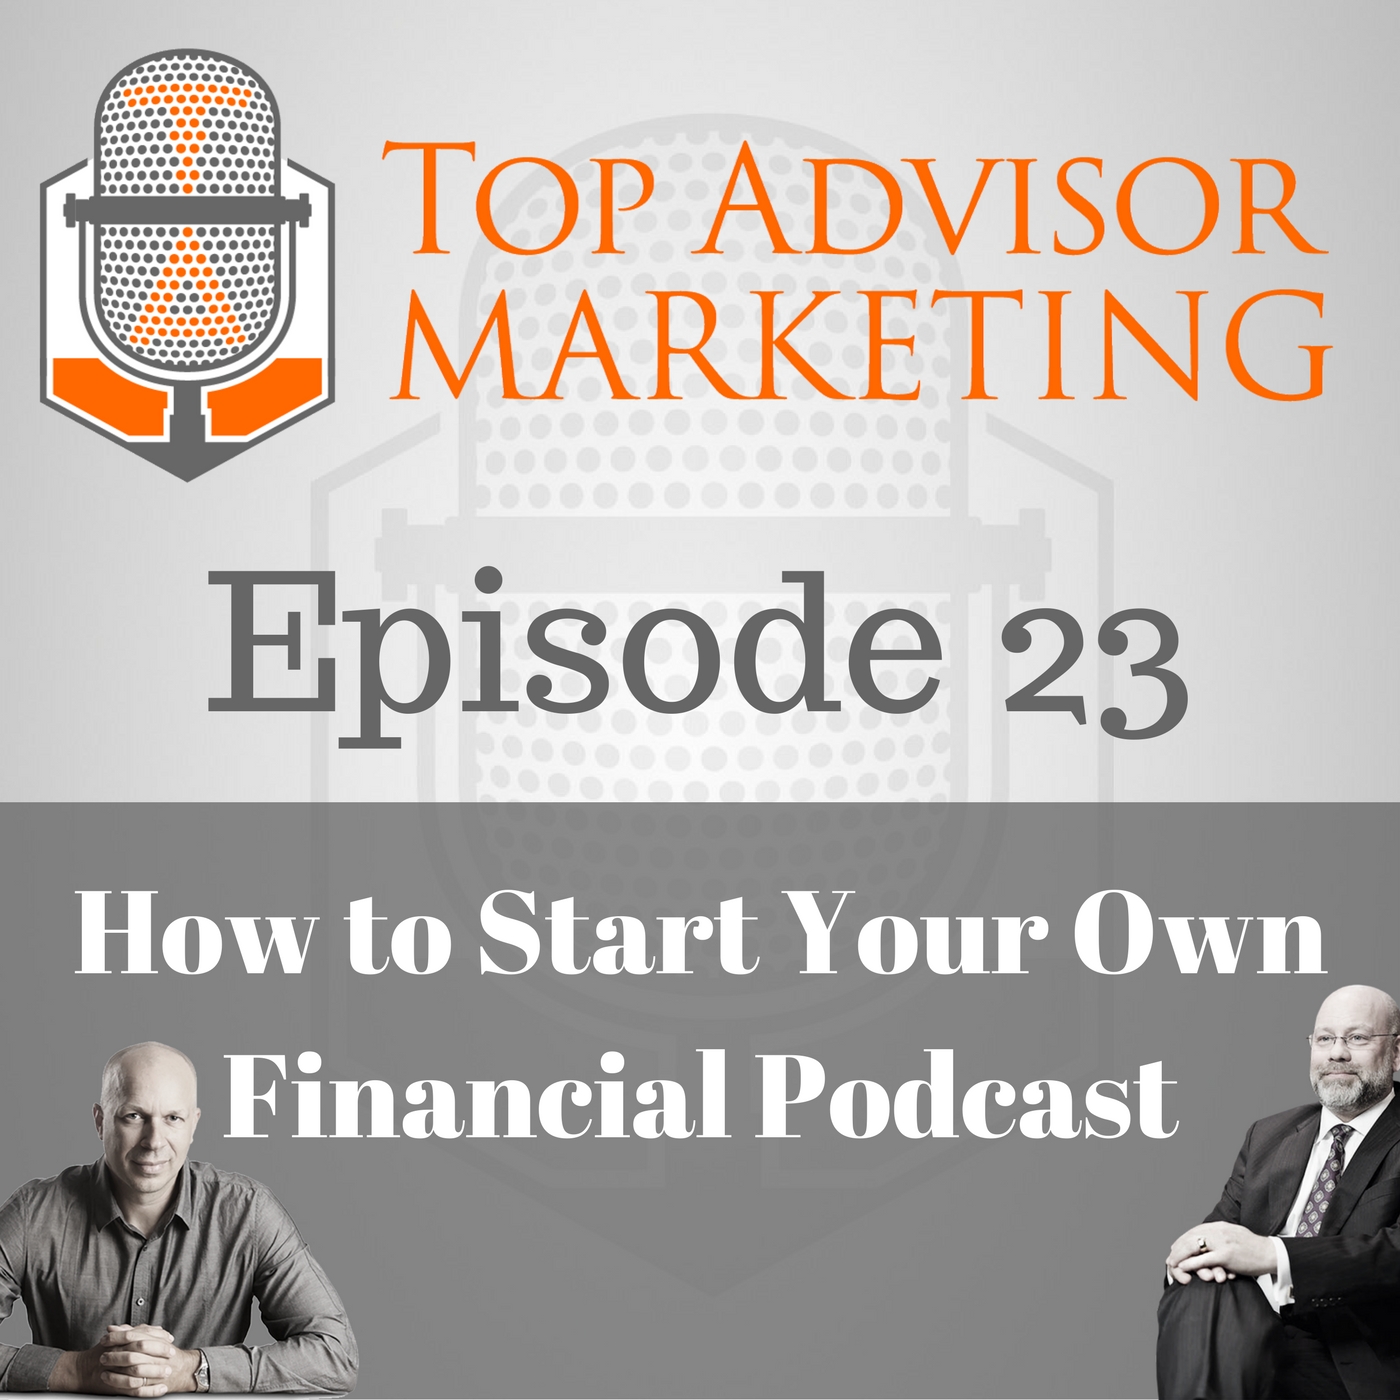 Episode 23 - How to Start Your Own Financial Podcast